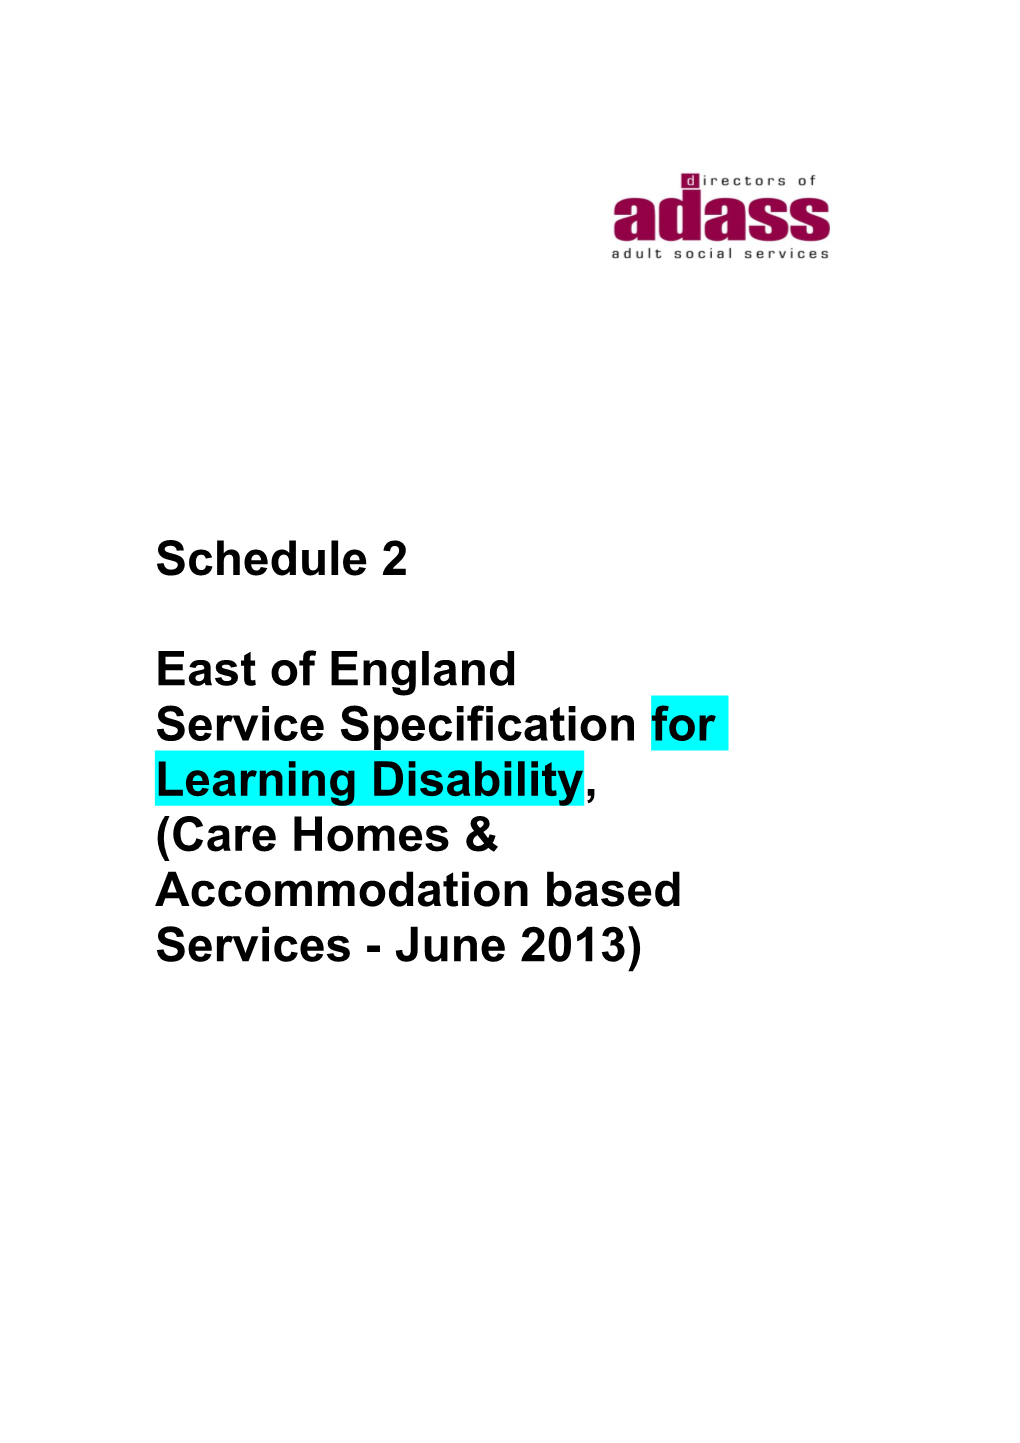 Service Specificationfor Learning Disability